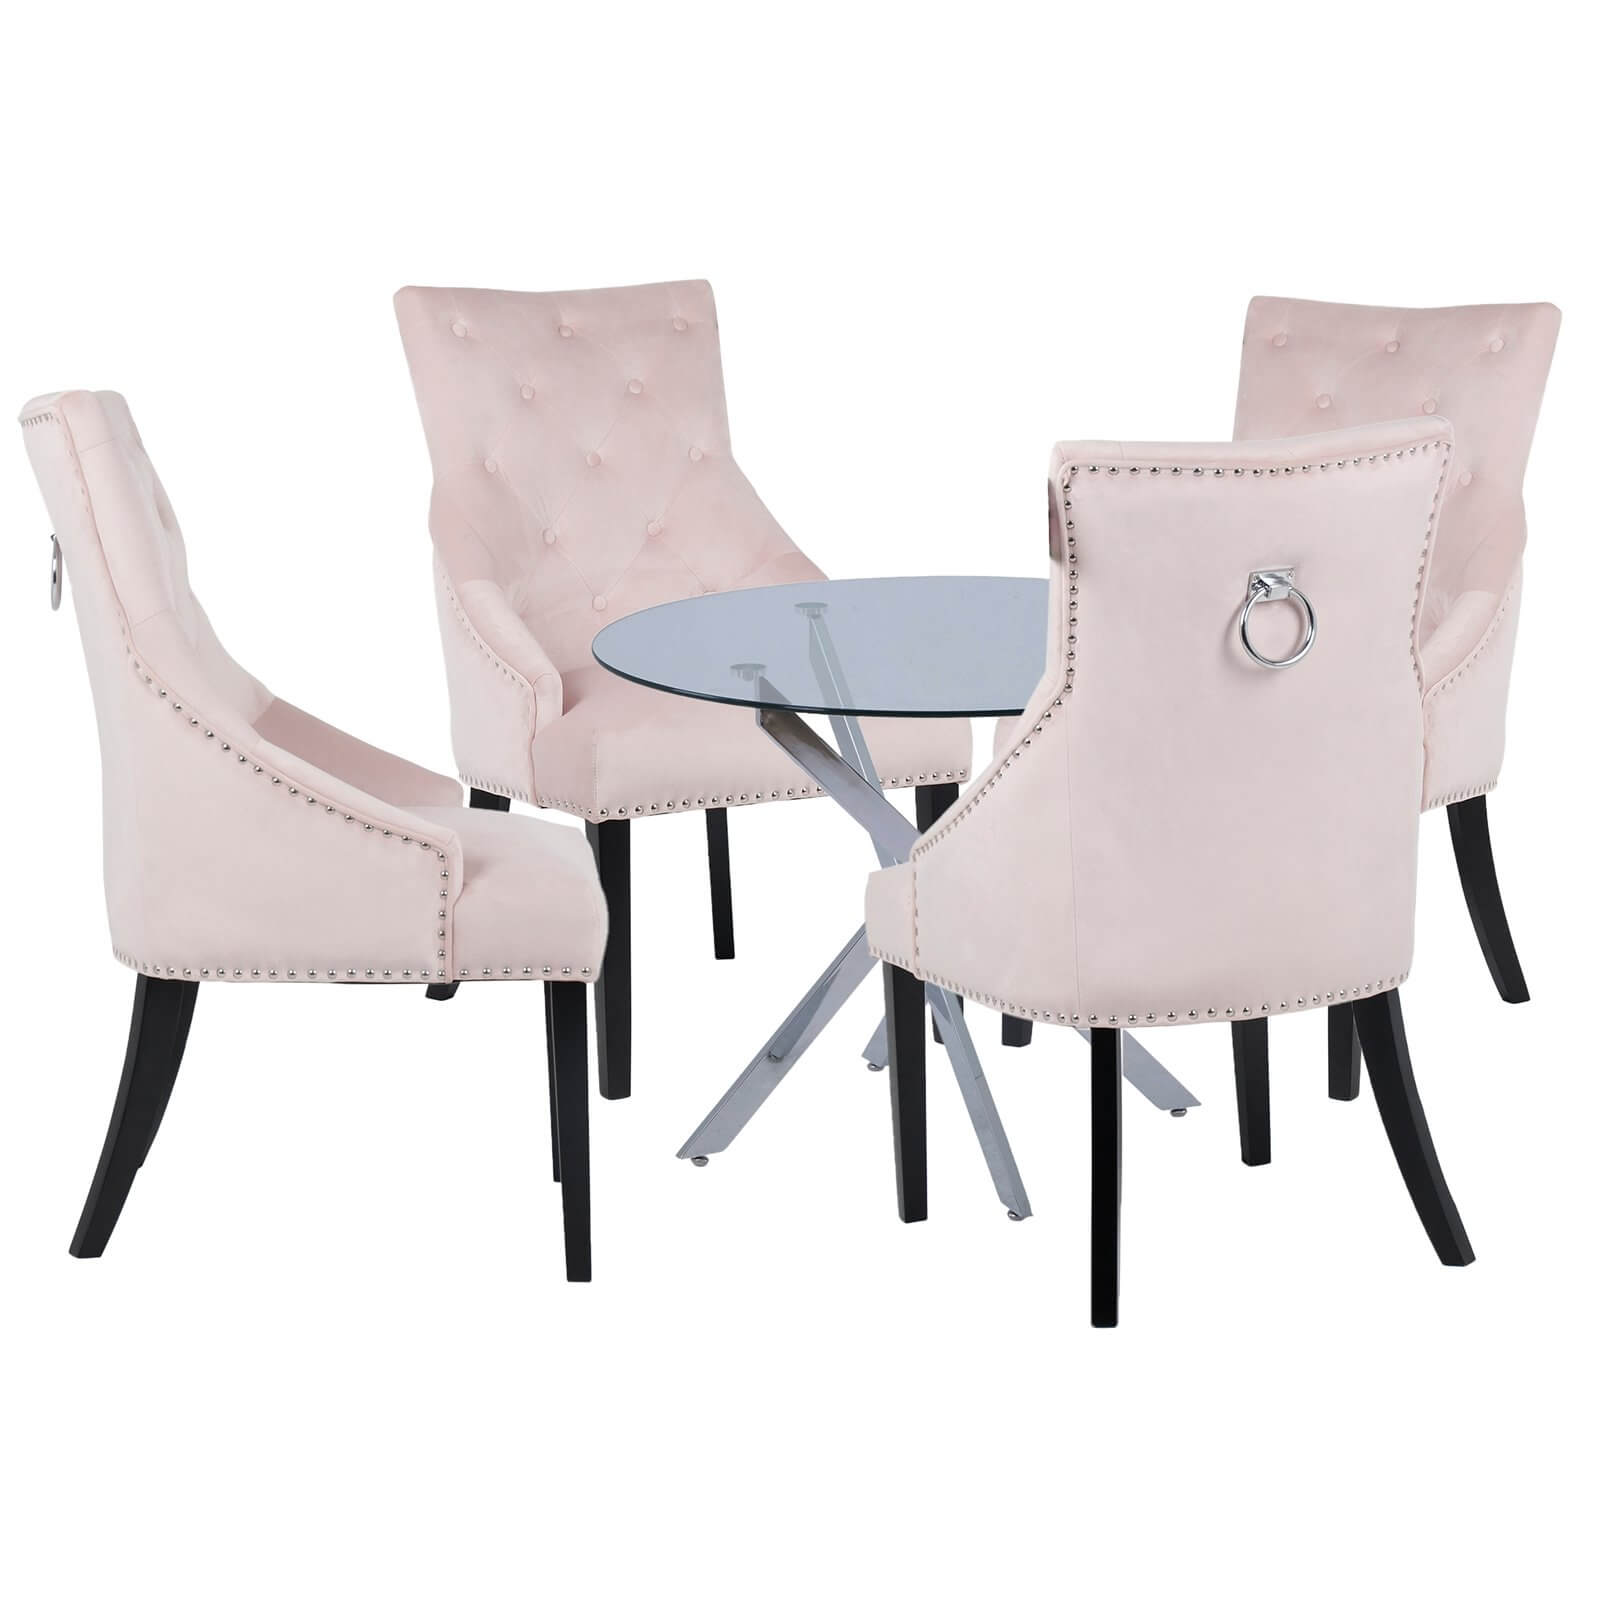 Sloane 4 Seater Dining Set - Annabelle Chairs - Pink